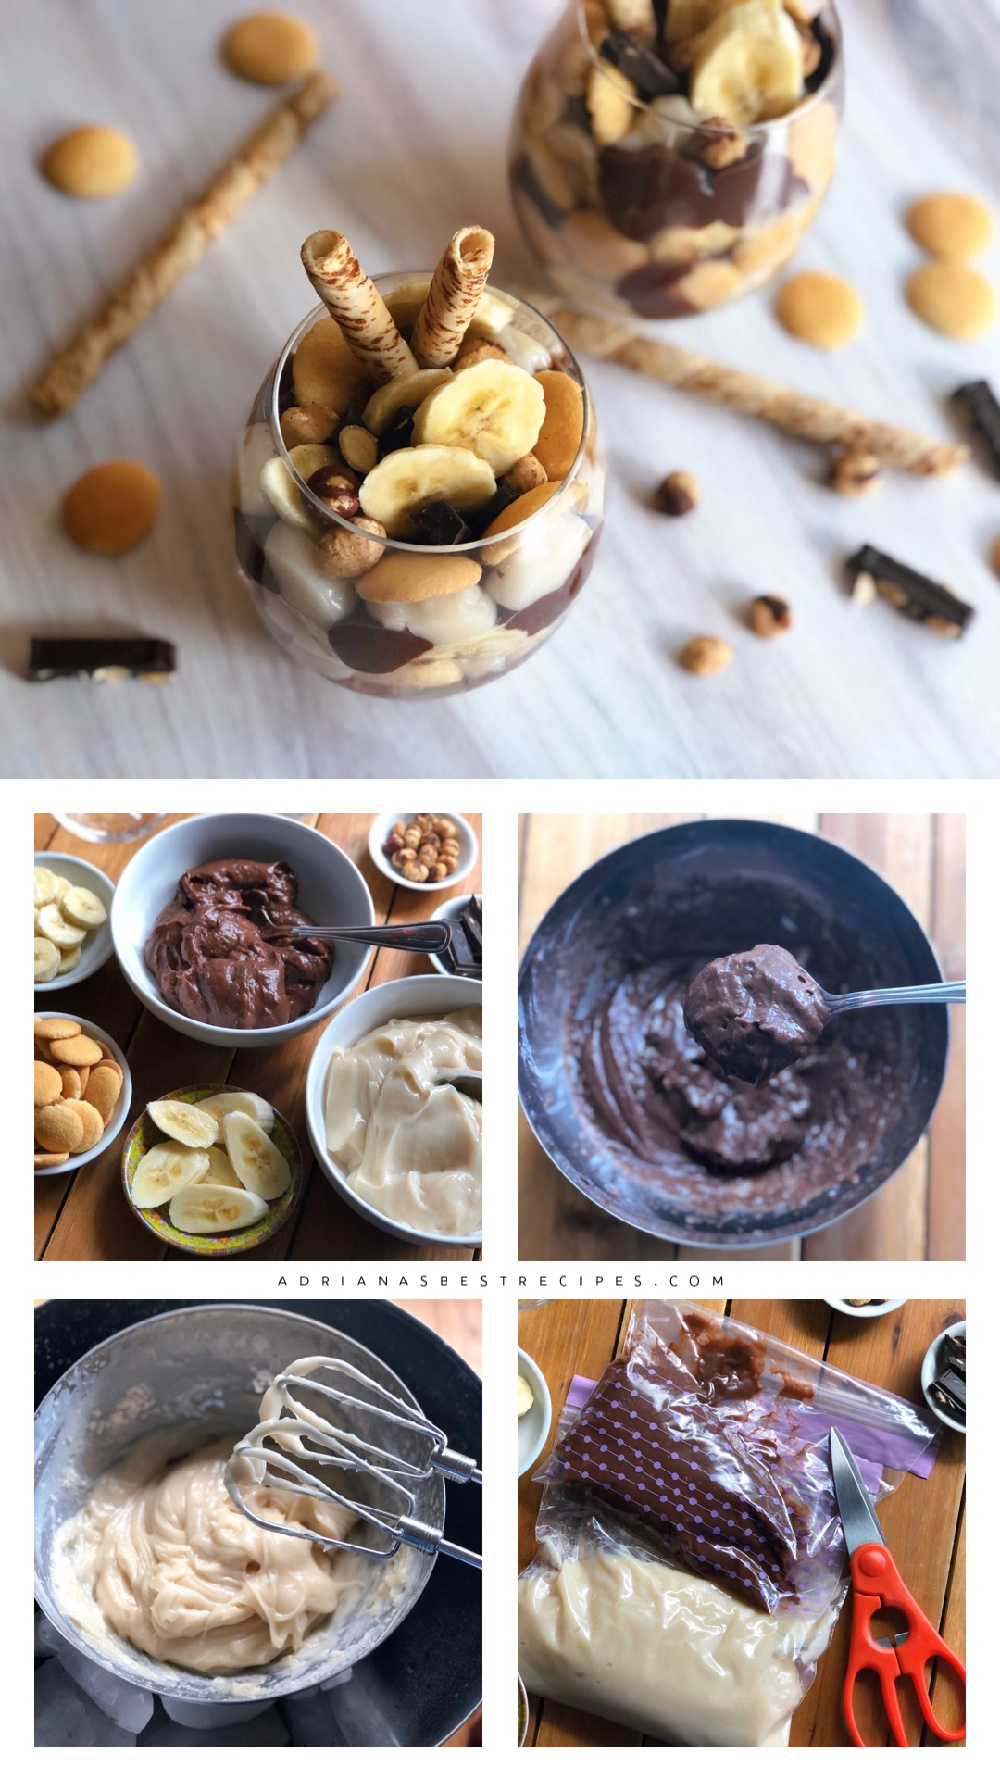 Step by step process for making the vegan chocolate pudding dessert